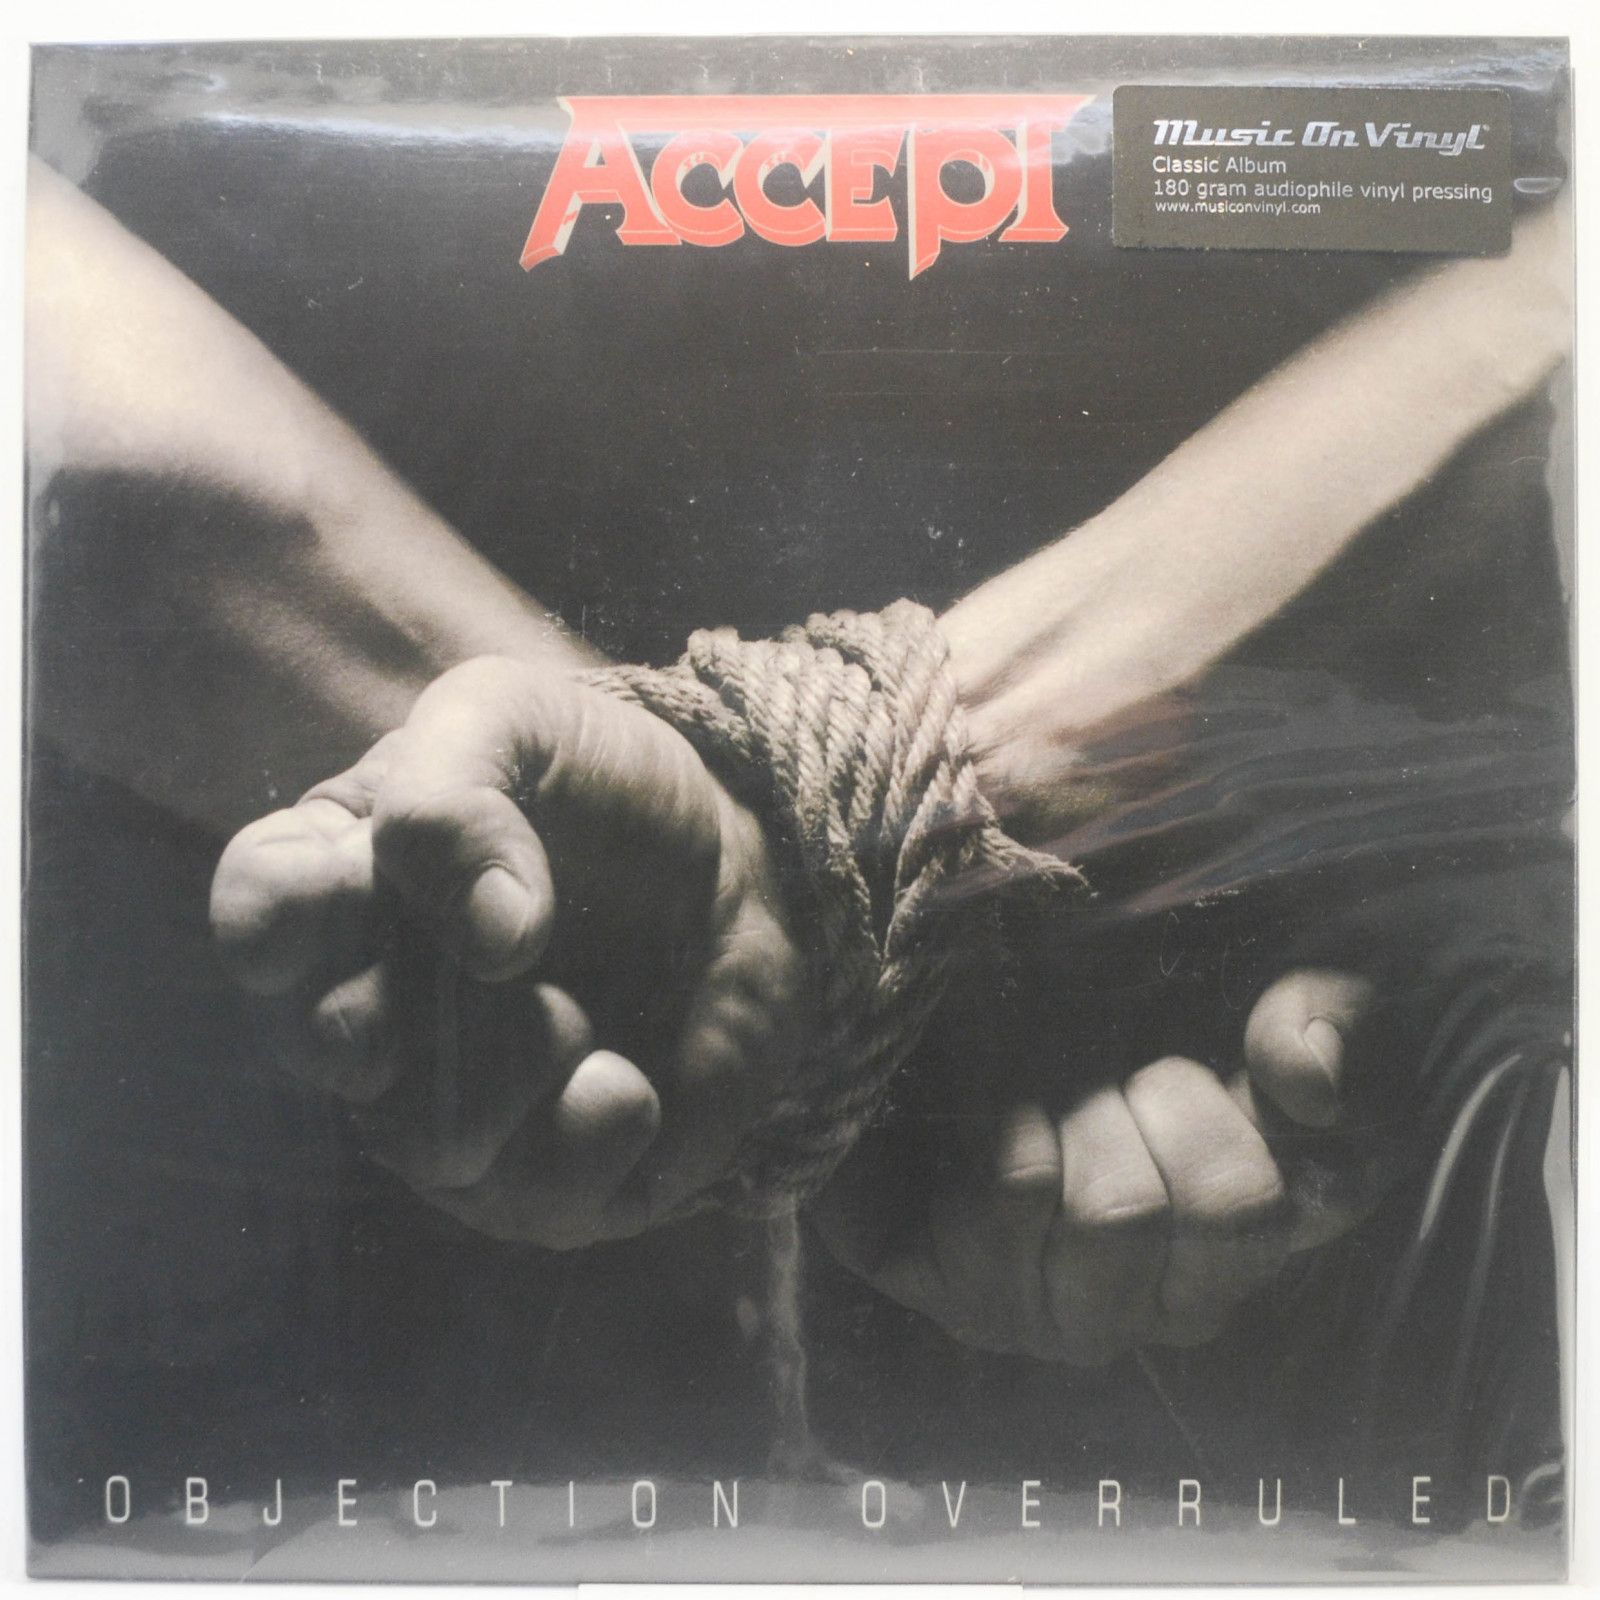 Accept — Objection Overruled, 1993